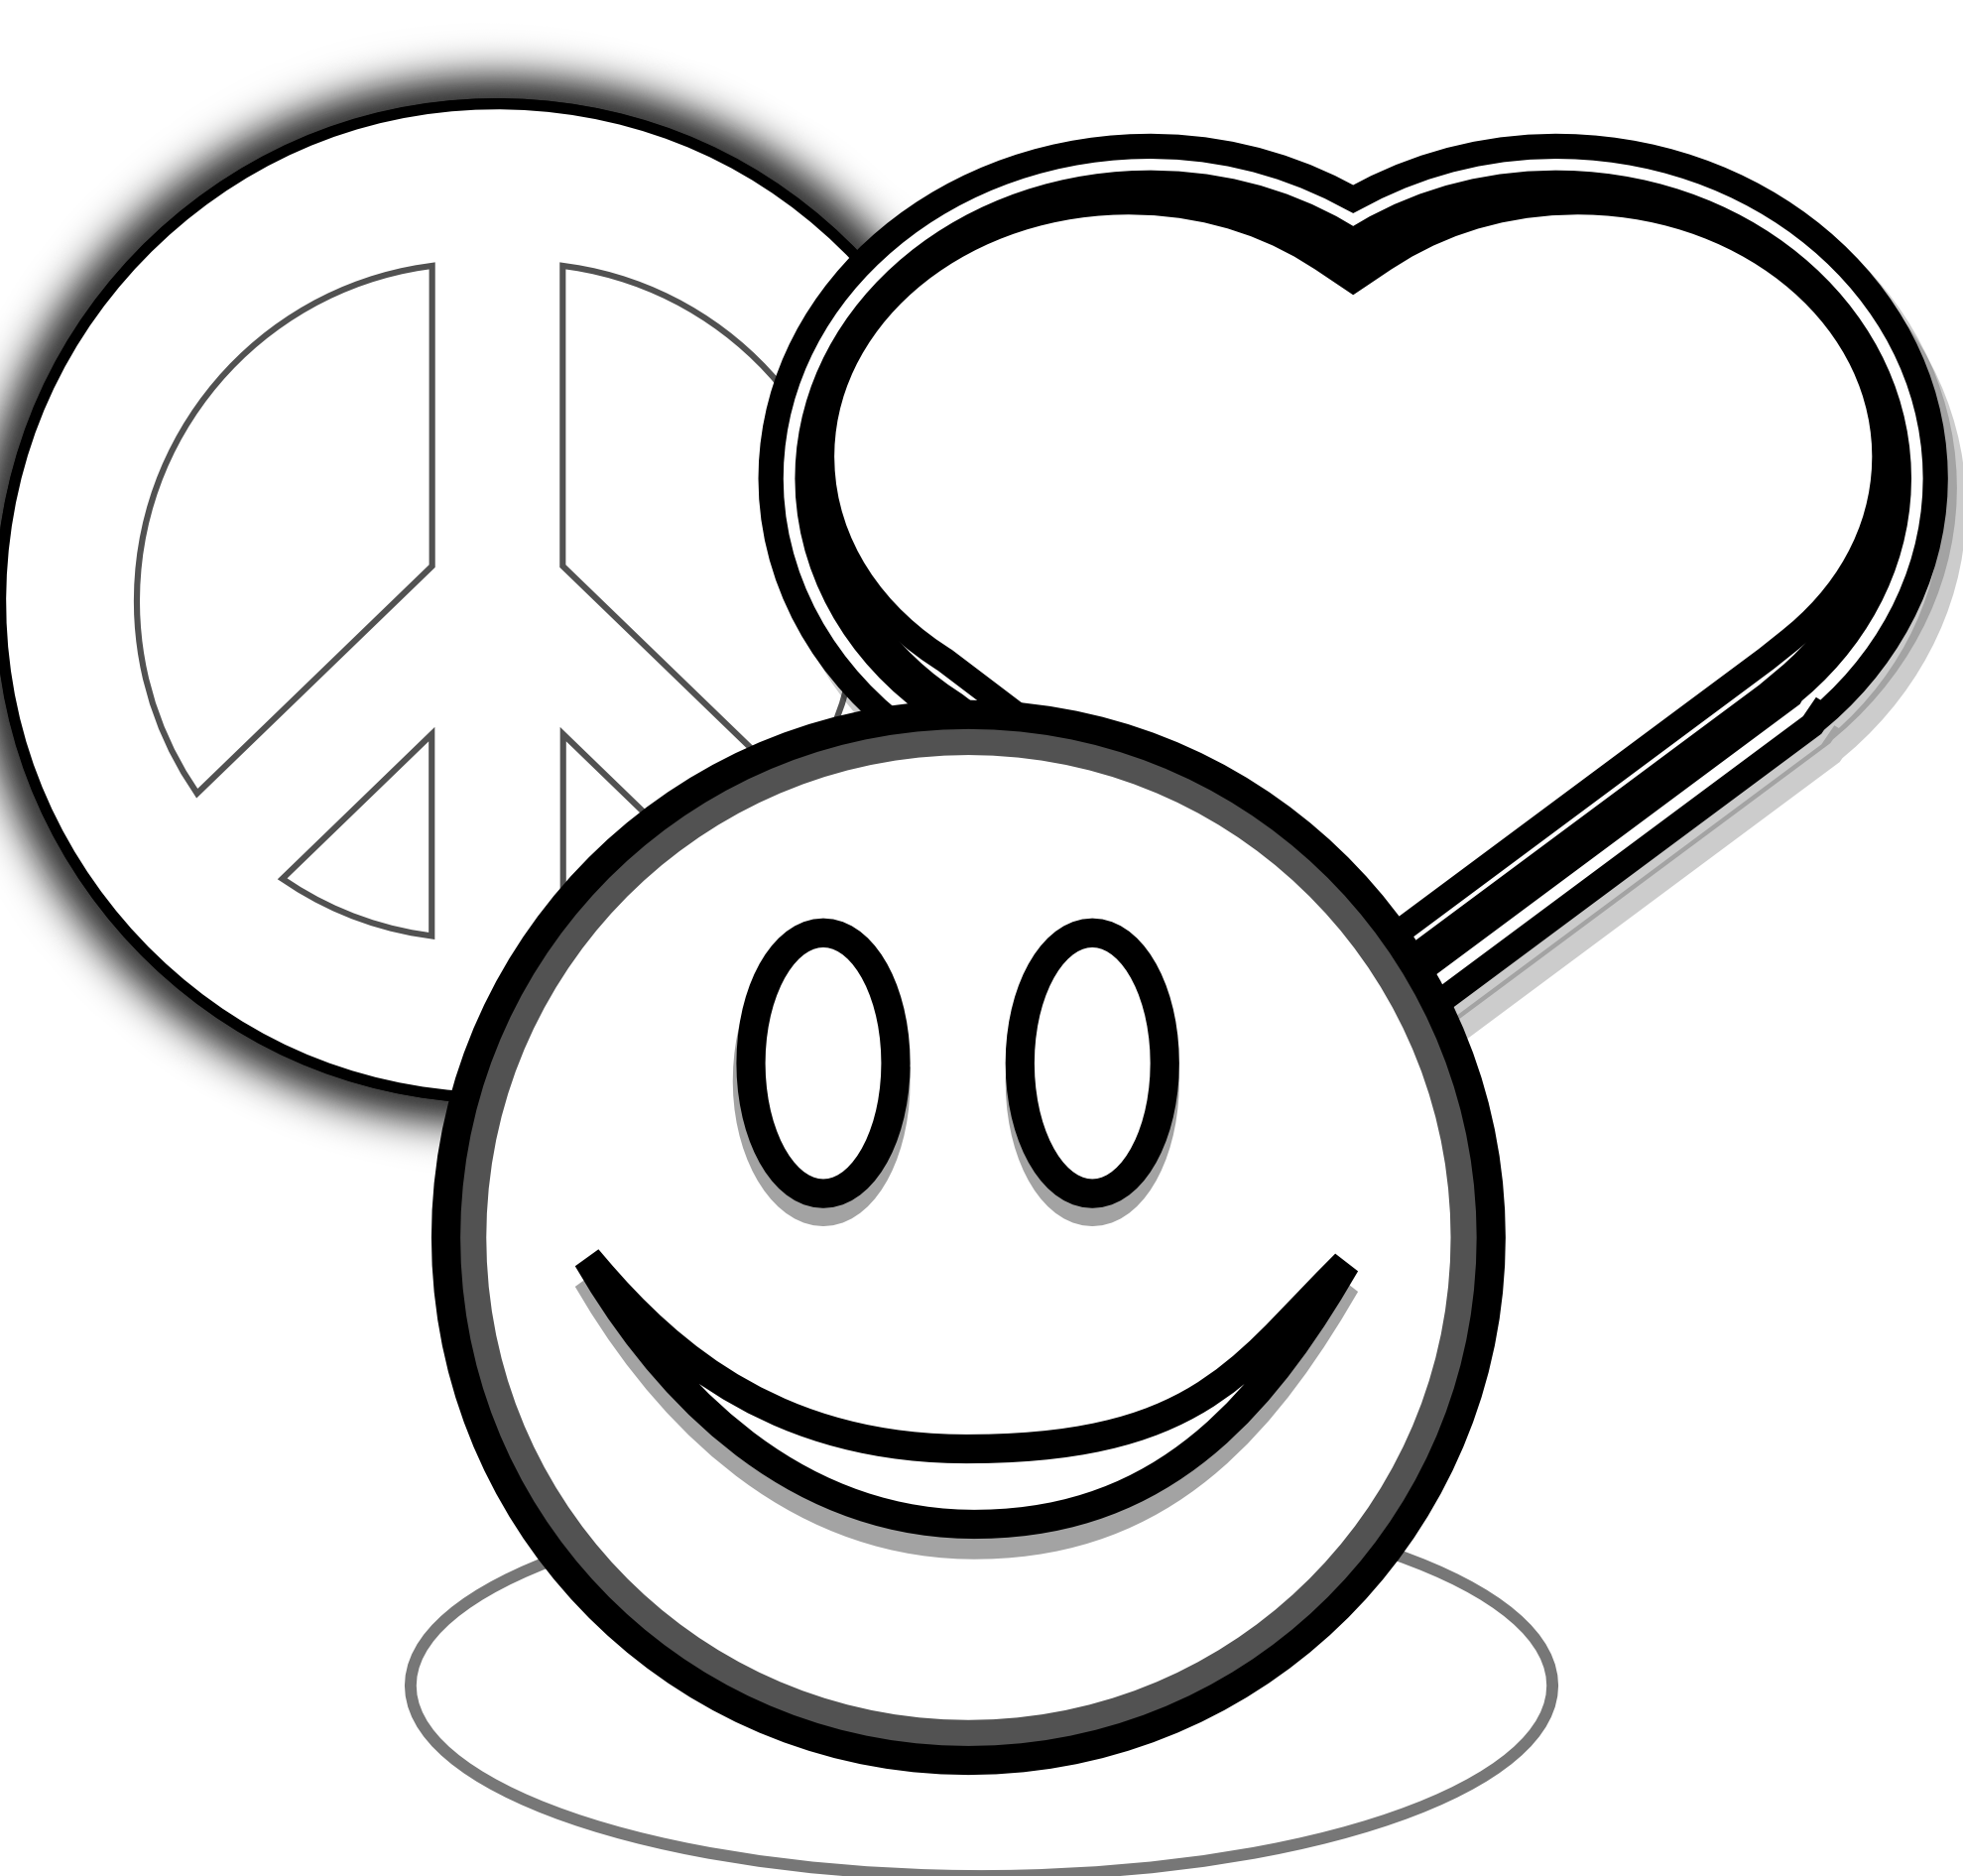 Black And White Love Clip Art - Clipart library